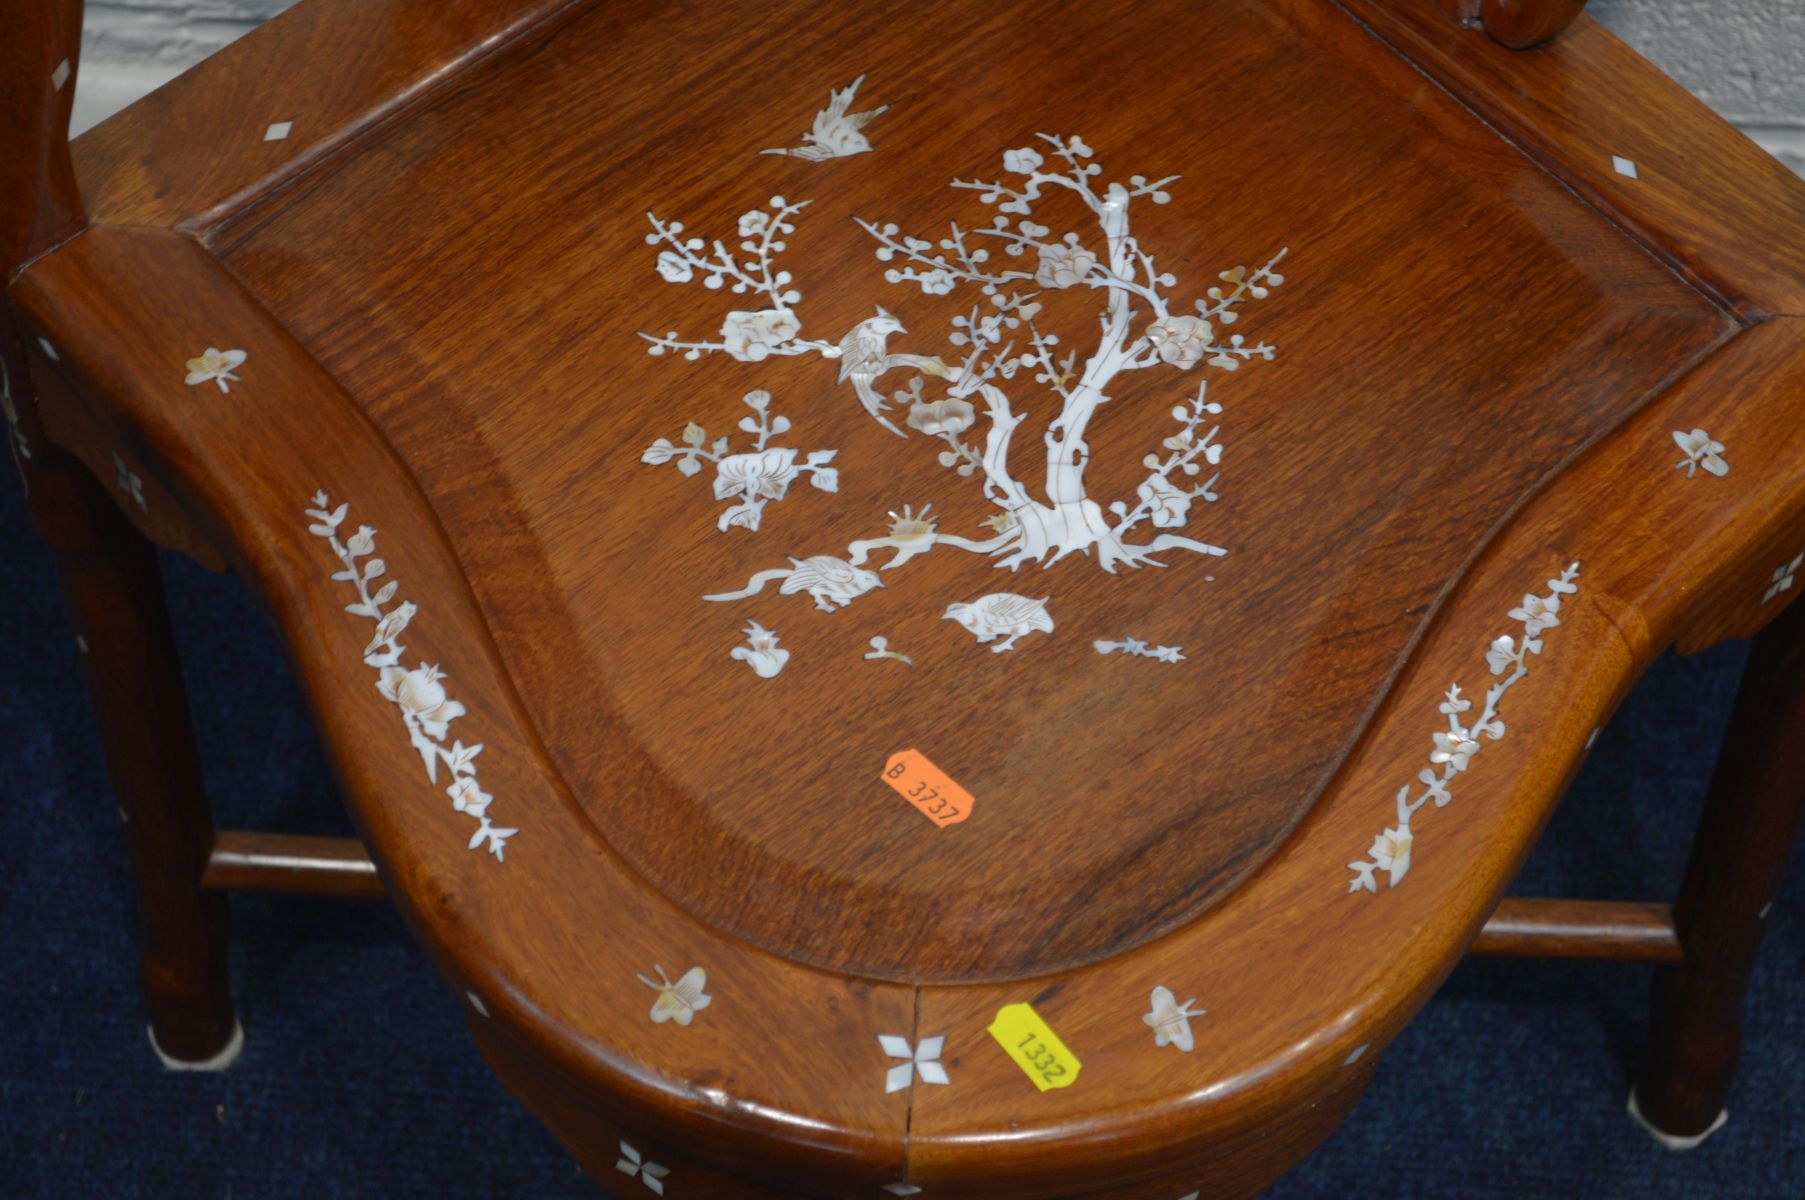 A NEAR PAIR OF MID TO LATE 20TH CENTURY ORIENTAL HARDWOOD CORNER CHAIRS, with mother of pearl - Image 7 of 7